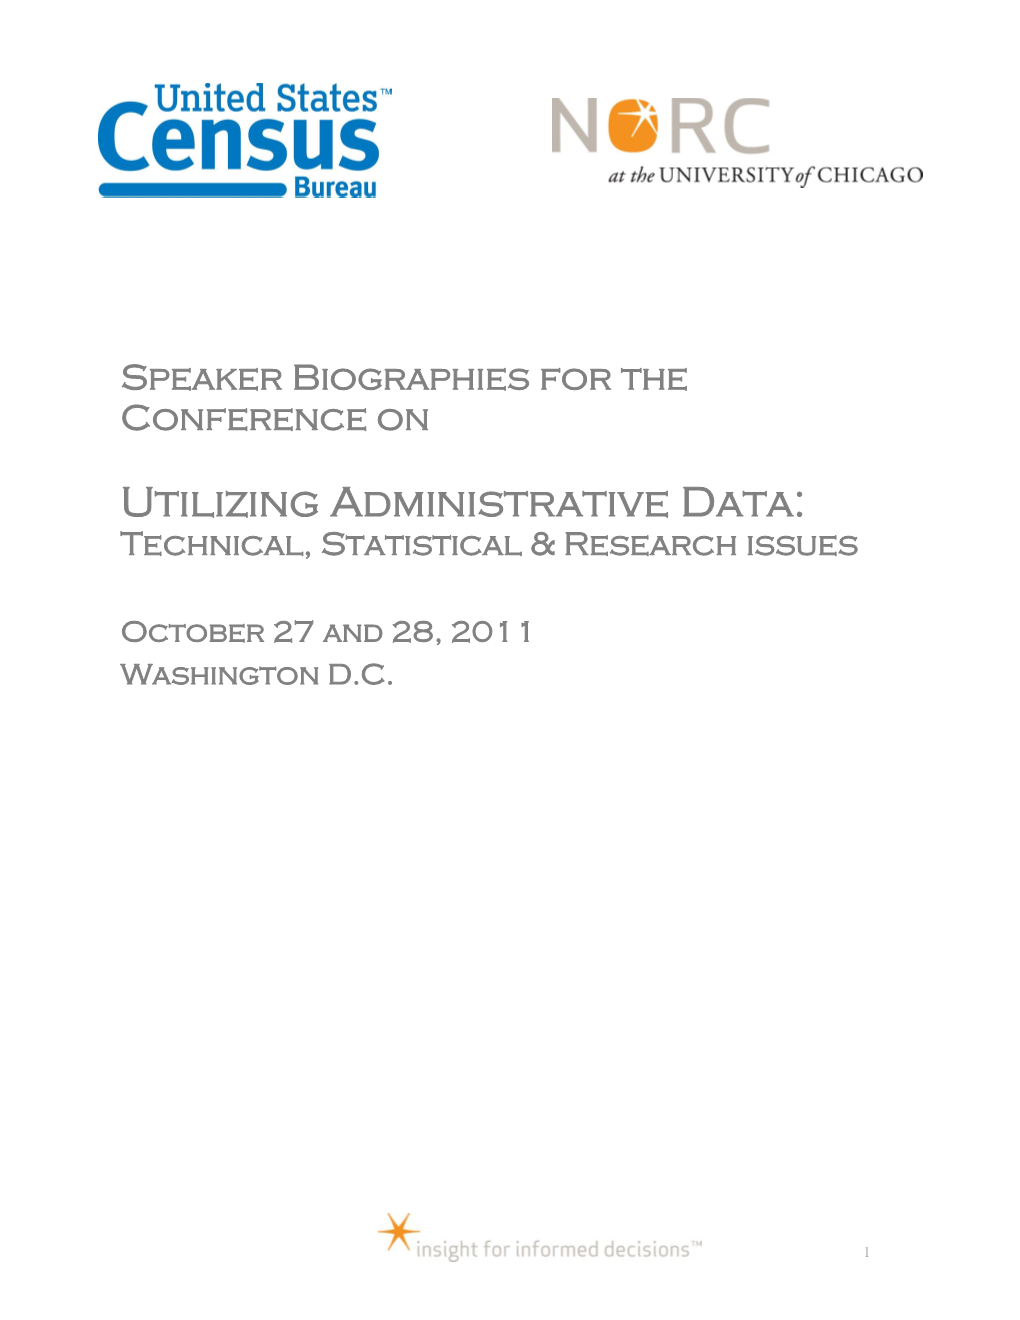 Utilizing Administrative Data: Technical, Statistical & Research Issues